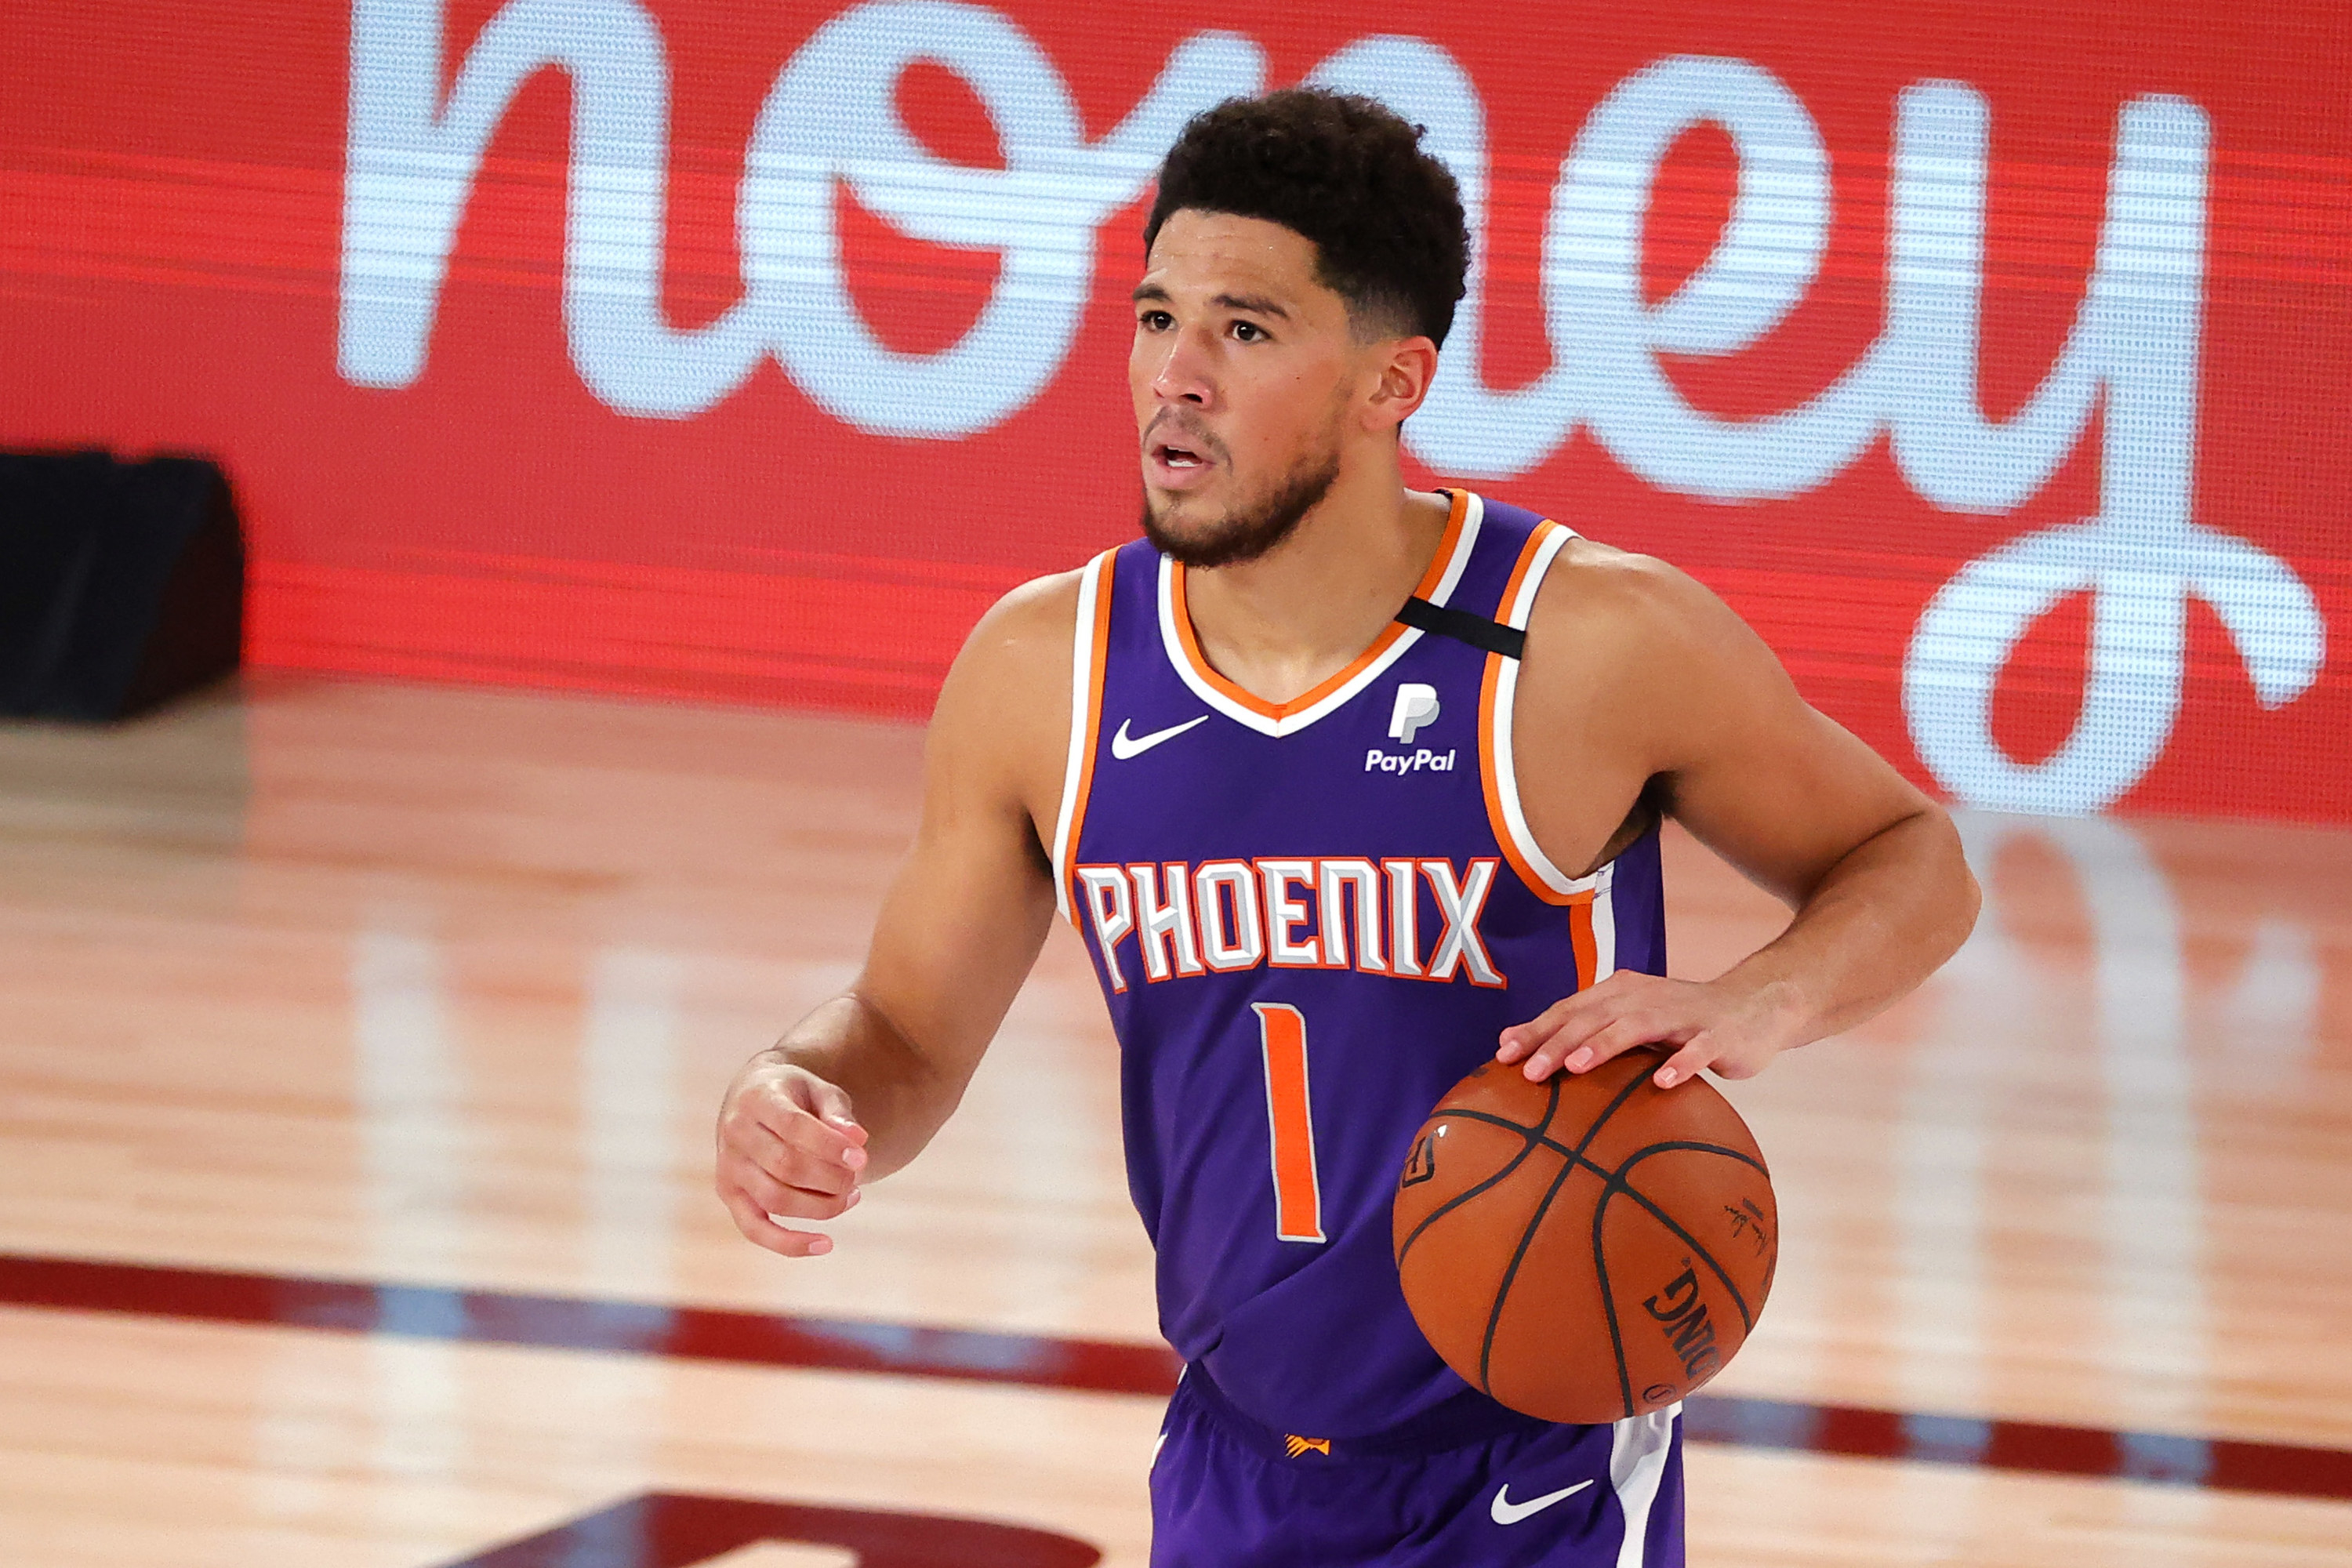 Purple Phoenix jersey with orange numbers and white lettering